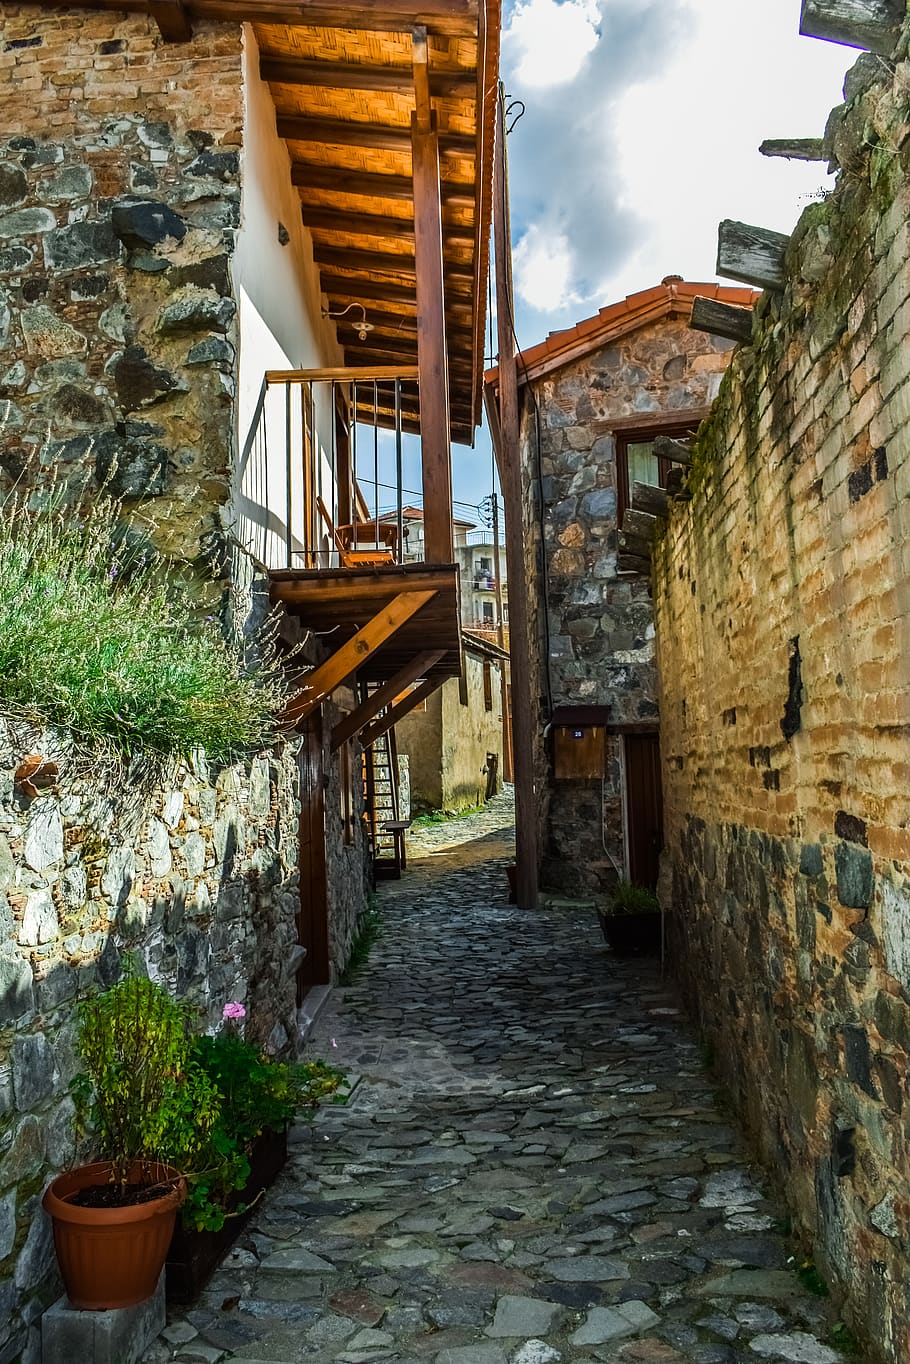 backstreet, alley, architecture, village, alleyway, street, traditional, kyperounta, cyprus, built structure